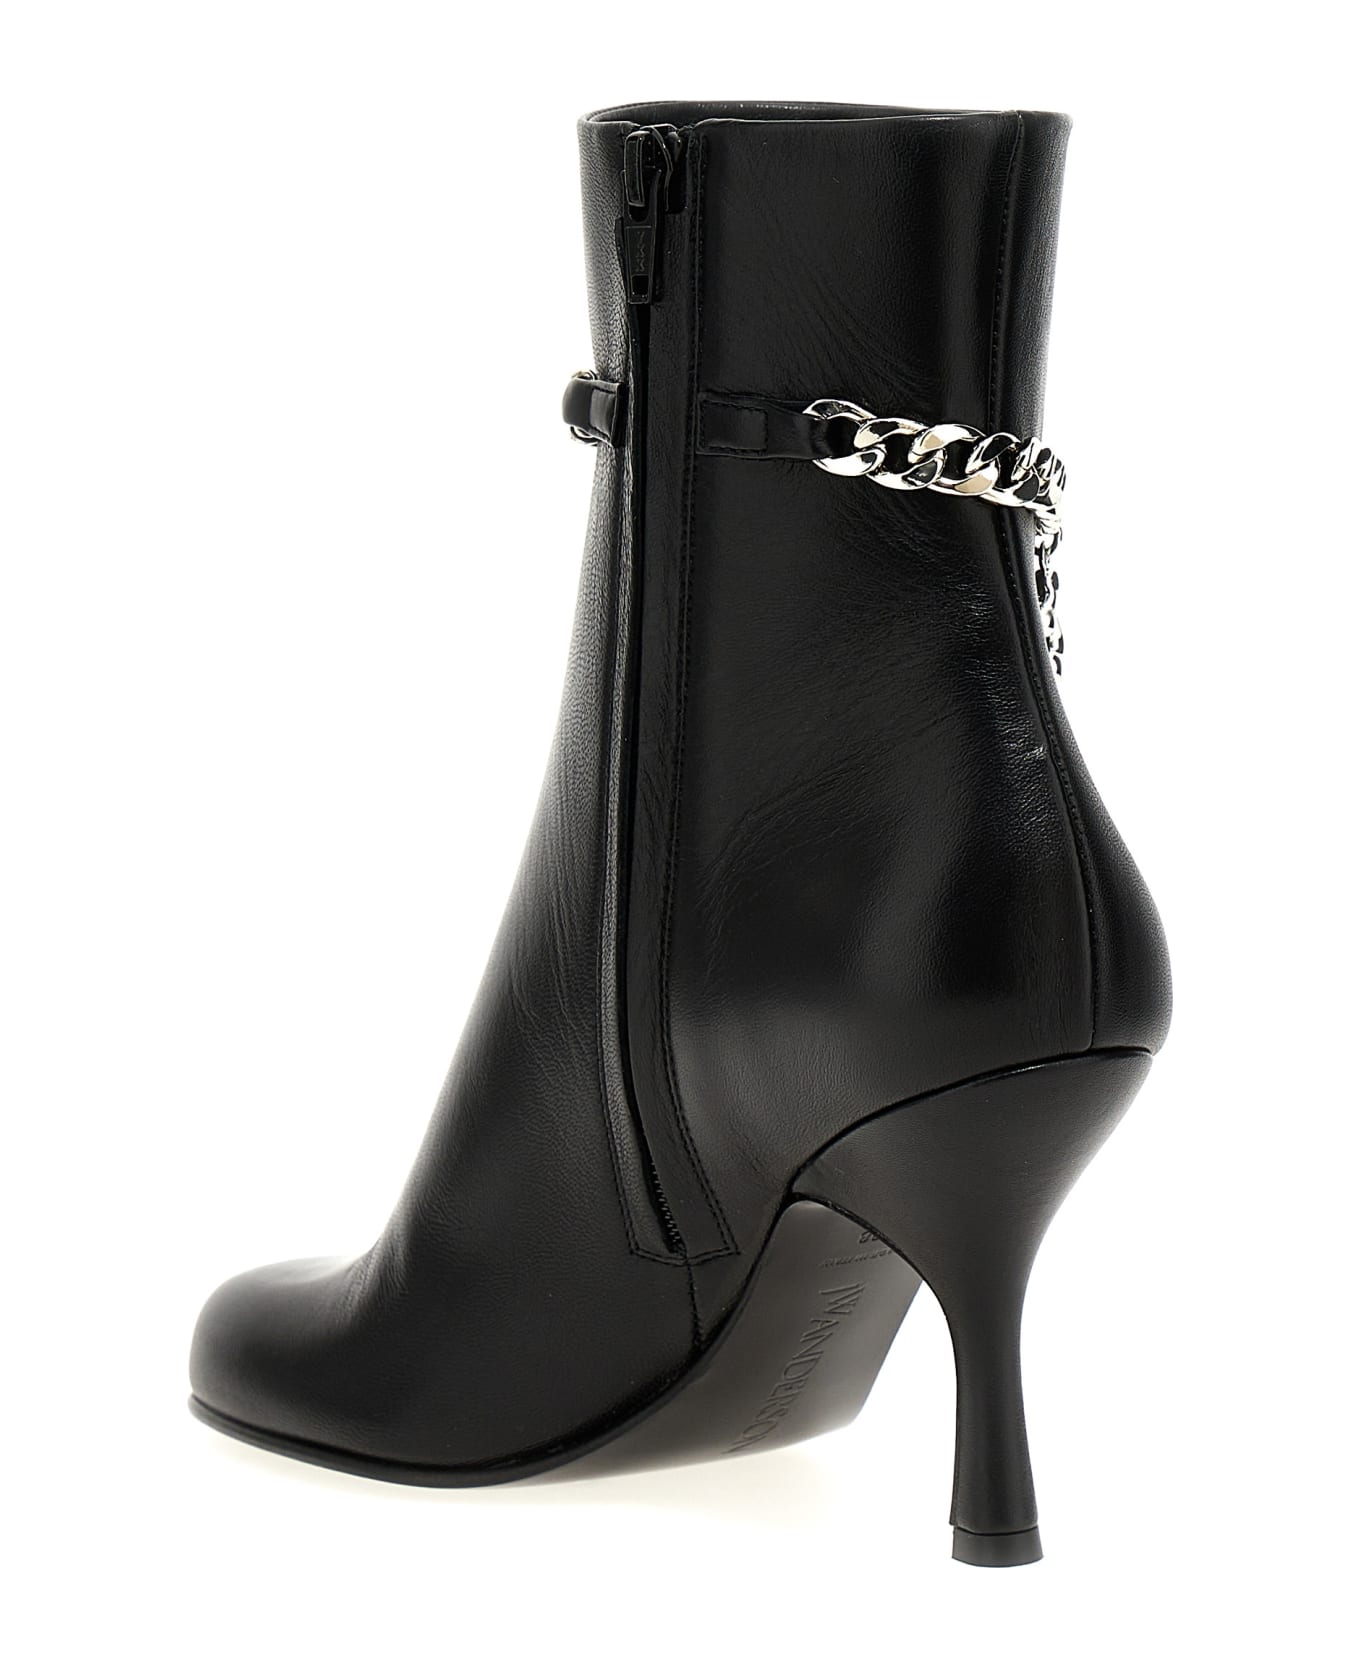 J.W. Anderson 'w/p' Ankle Boots - Black  